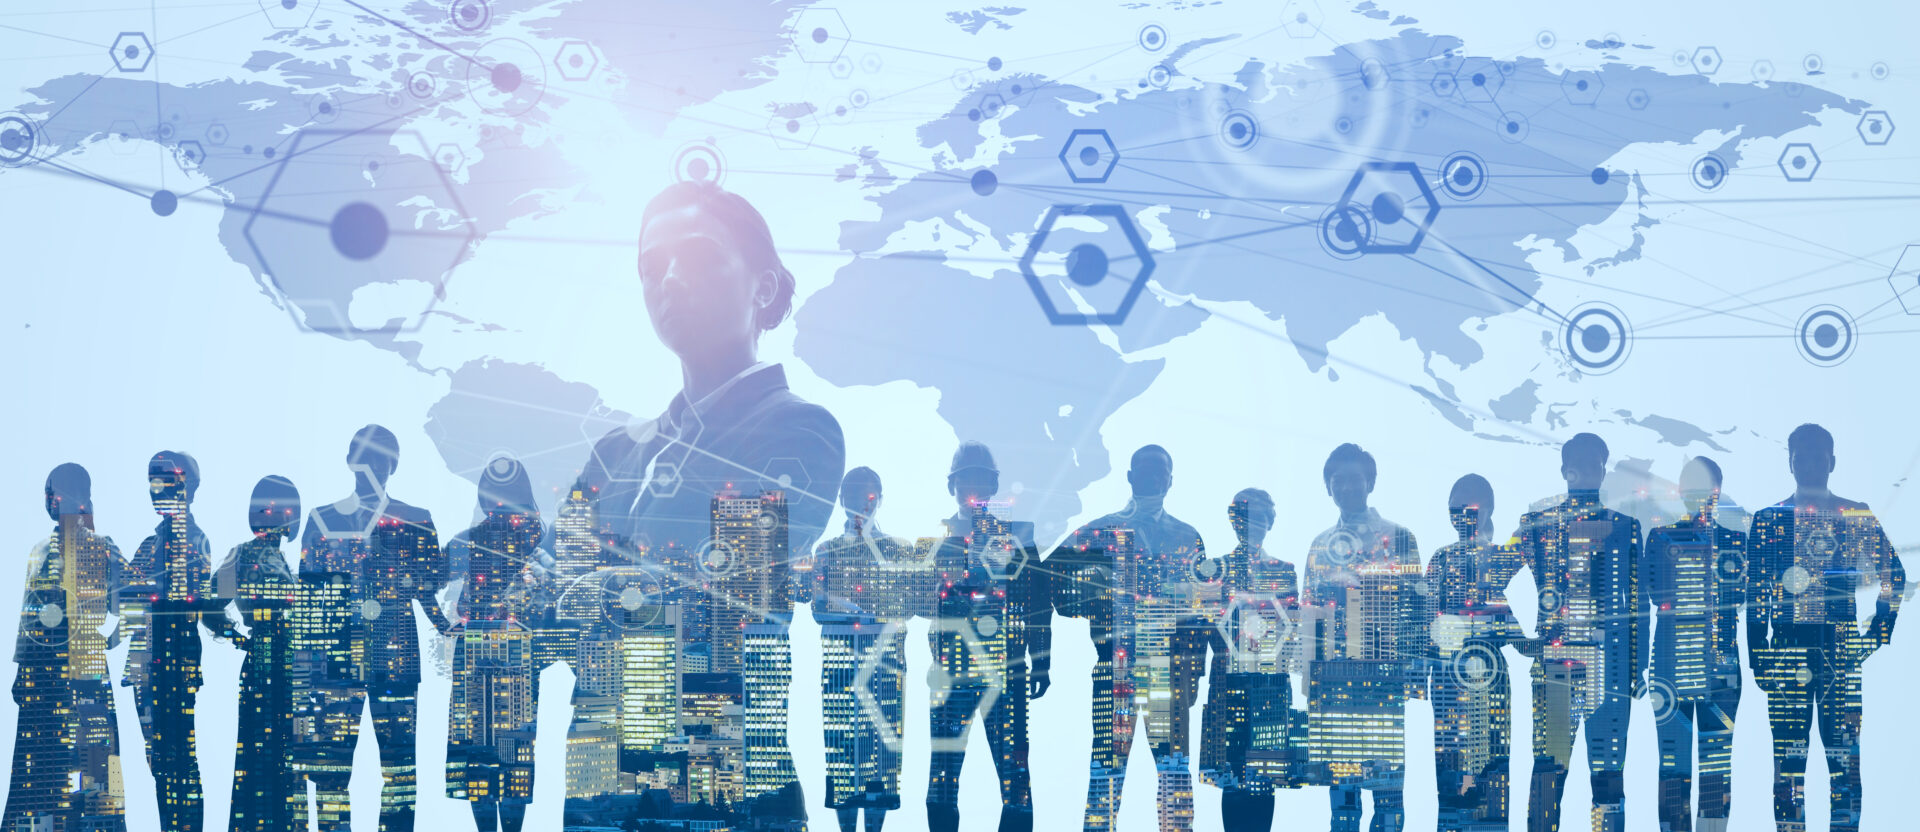 Silhouettes of business people standing in front of a world map.